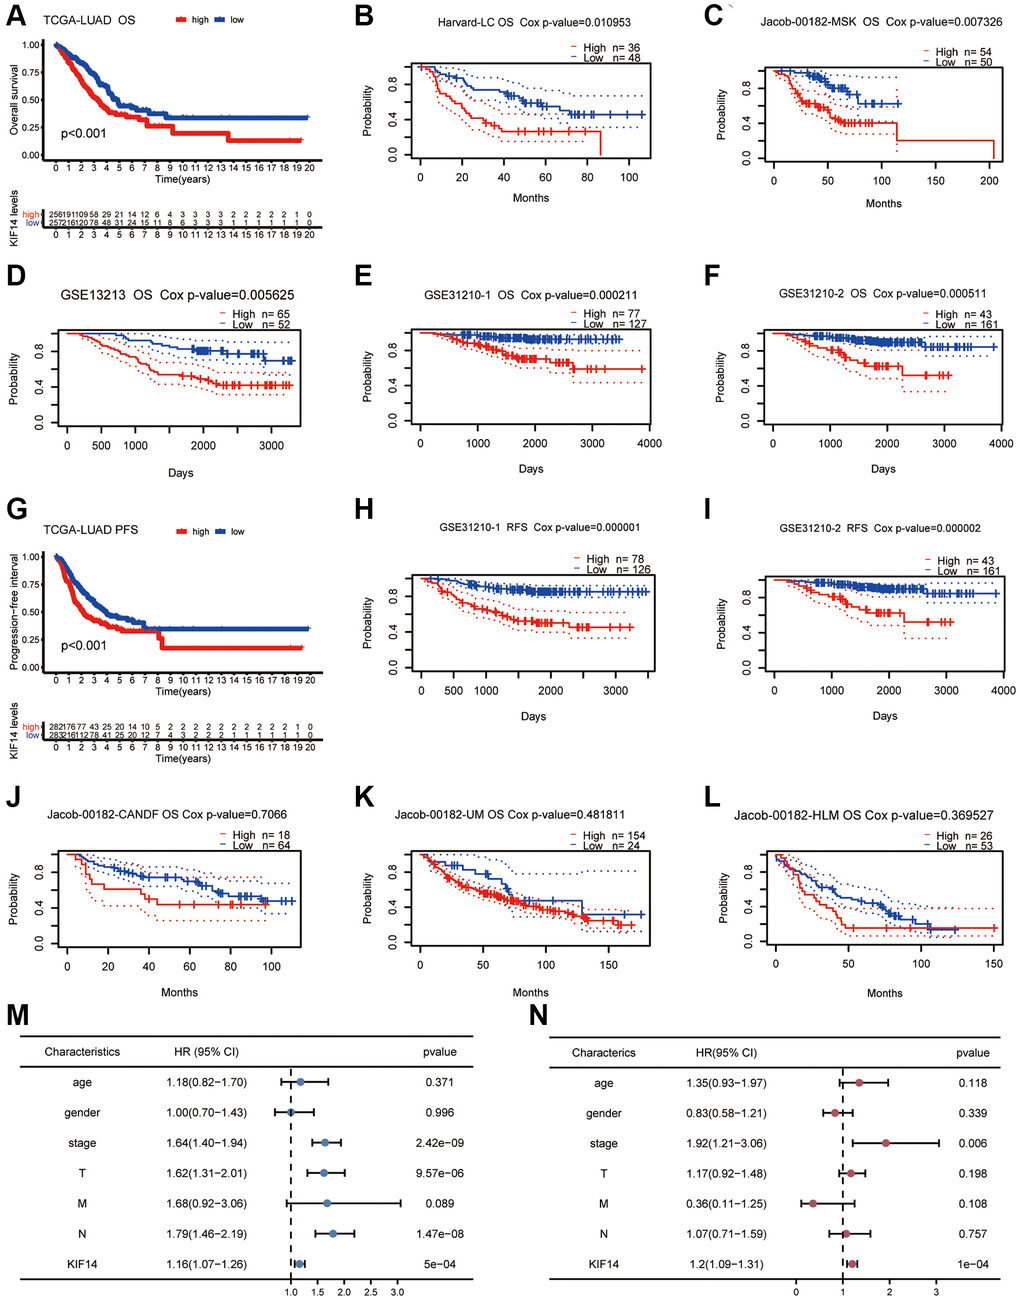 Survival analyses of KIF14 in LUAD. (A–F) K-M plots for OS in different LUAD cohorts (TCGA-LUAD cohort, Harvard -LC cohort, jacob-00182-MSK cohort, GSE13212 cohort, GSE31210-1 cohort, and GSE31210-2 cohort). (G–I) Survival curves of PFS, RFS in LUAD cohorts (TCGA-LUAD cohort, GSE31210-1 cohort, and GSE31210-2 cohort). (J–L) OS survival analyses of KIF14 in LUAD cohorts with negative results (jacob-00182-CANDF cohort, jacob-00182-UM cohort and jacob-00182-HLM cohort). (M, N) Univariate (M) and multivariate (N) Cox regression analyses to evaluate the independent factors of KIF14 in TCGA-LUAD cohort.